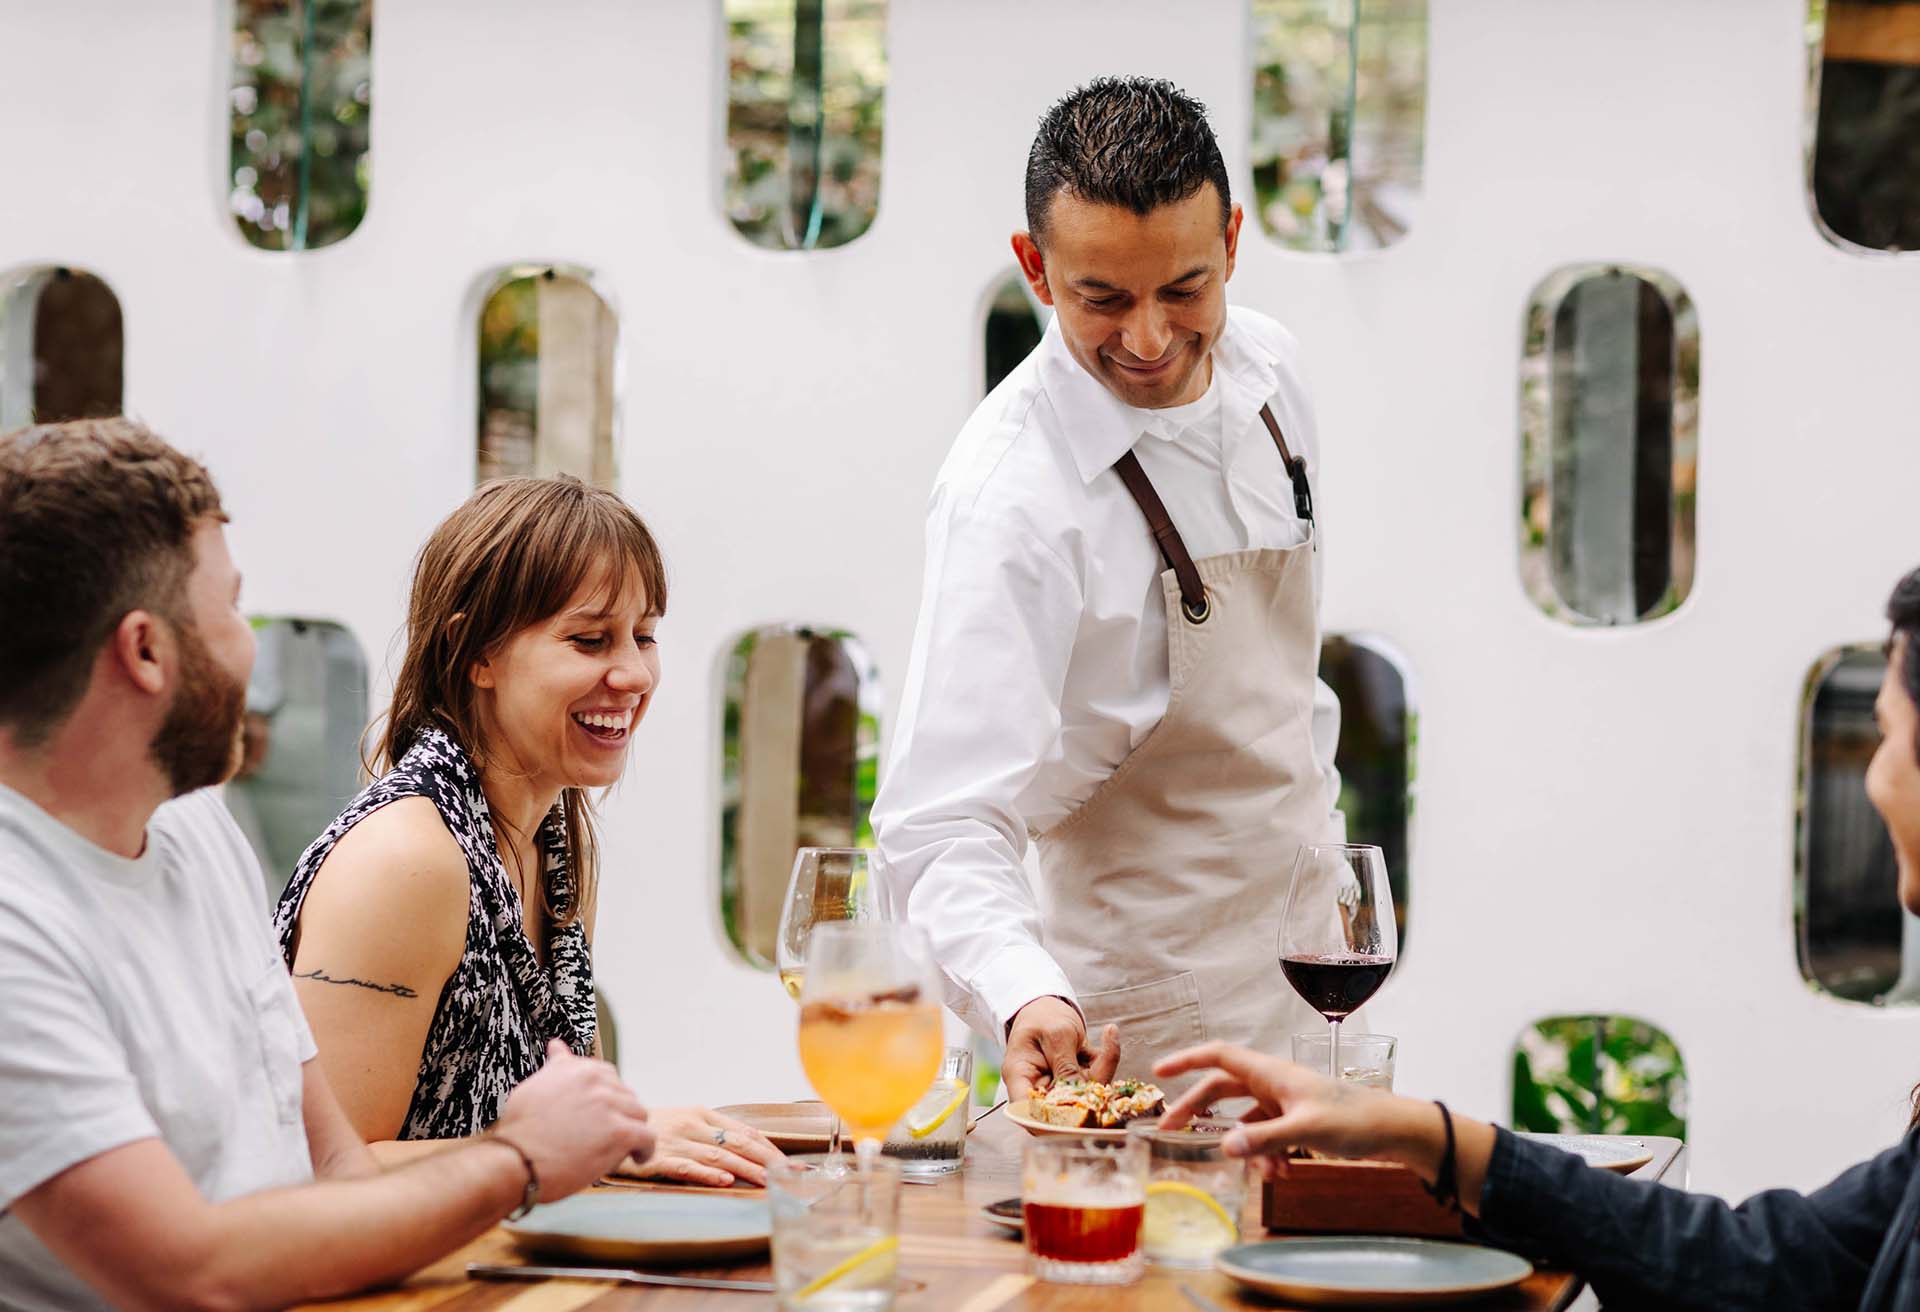 Image depicts a restaurant scene where a waiter is serving dishes at a table. Guests are smiling and appear entertained